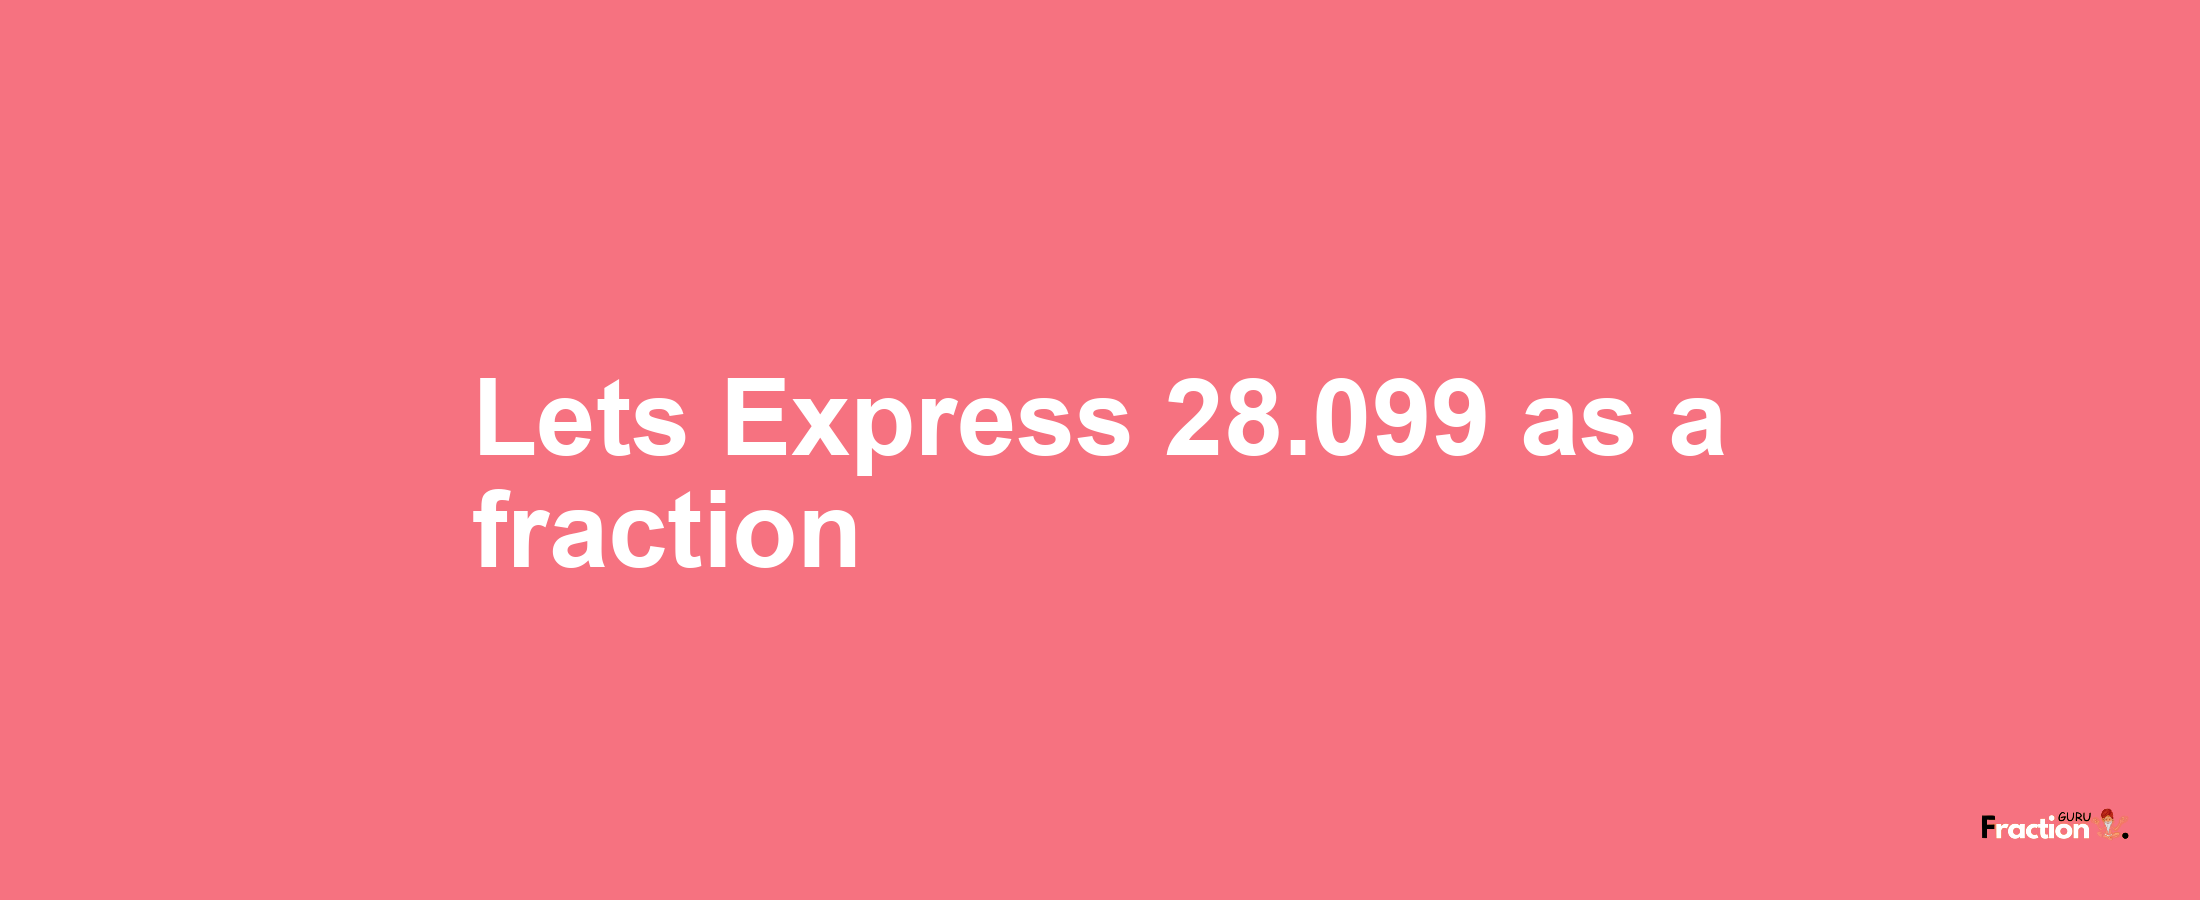 Lets Express 28.099 as afraction